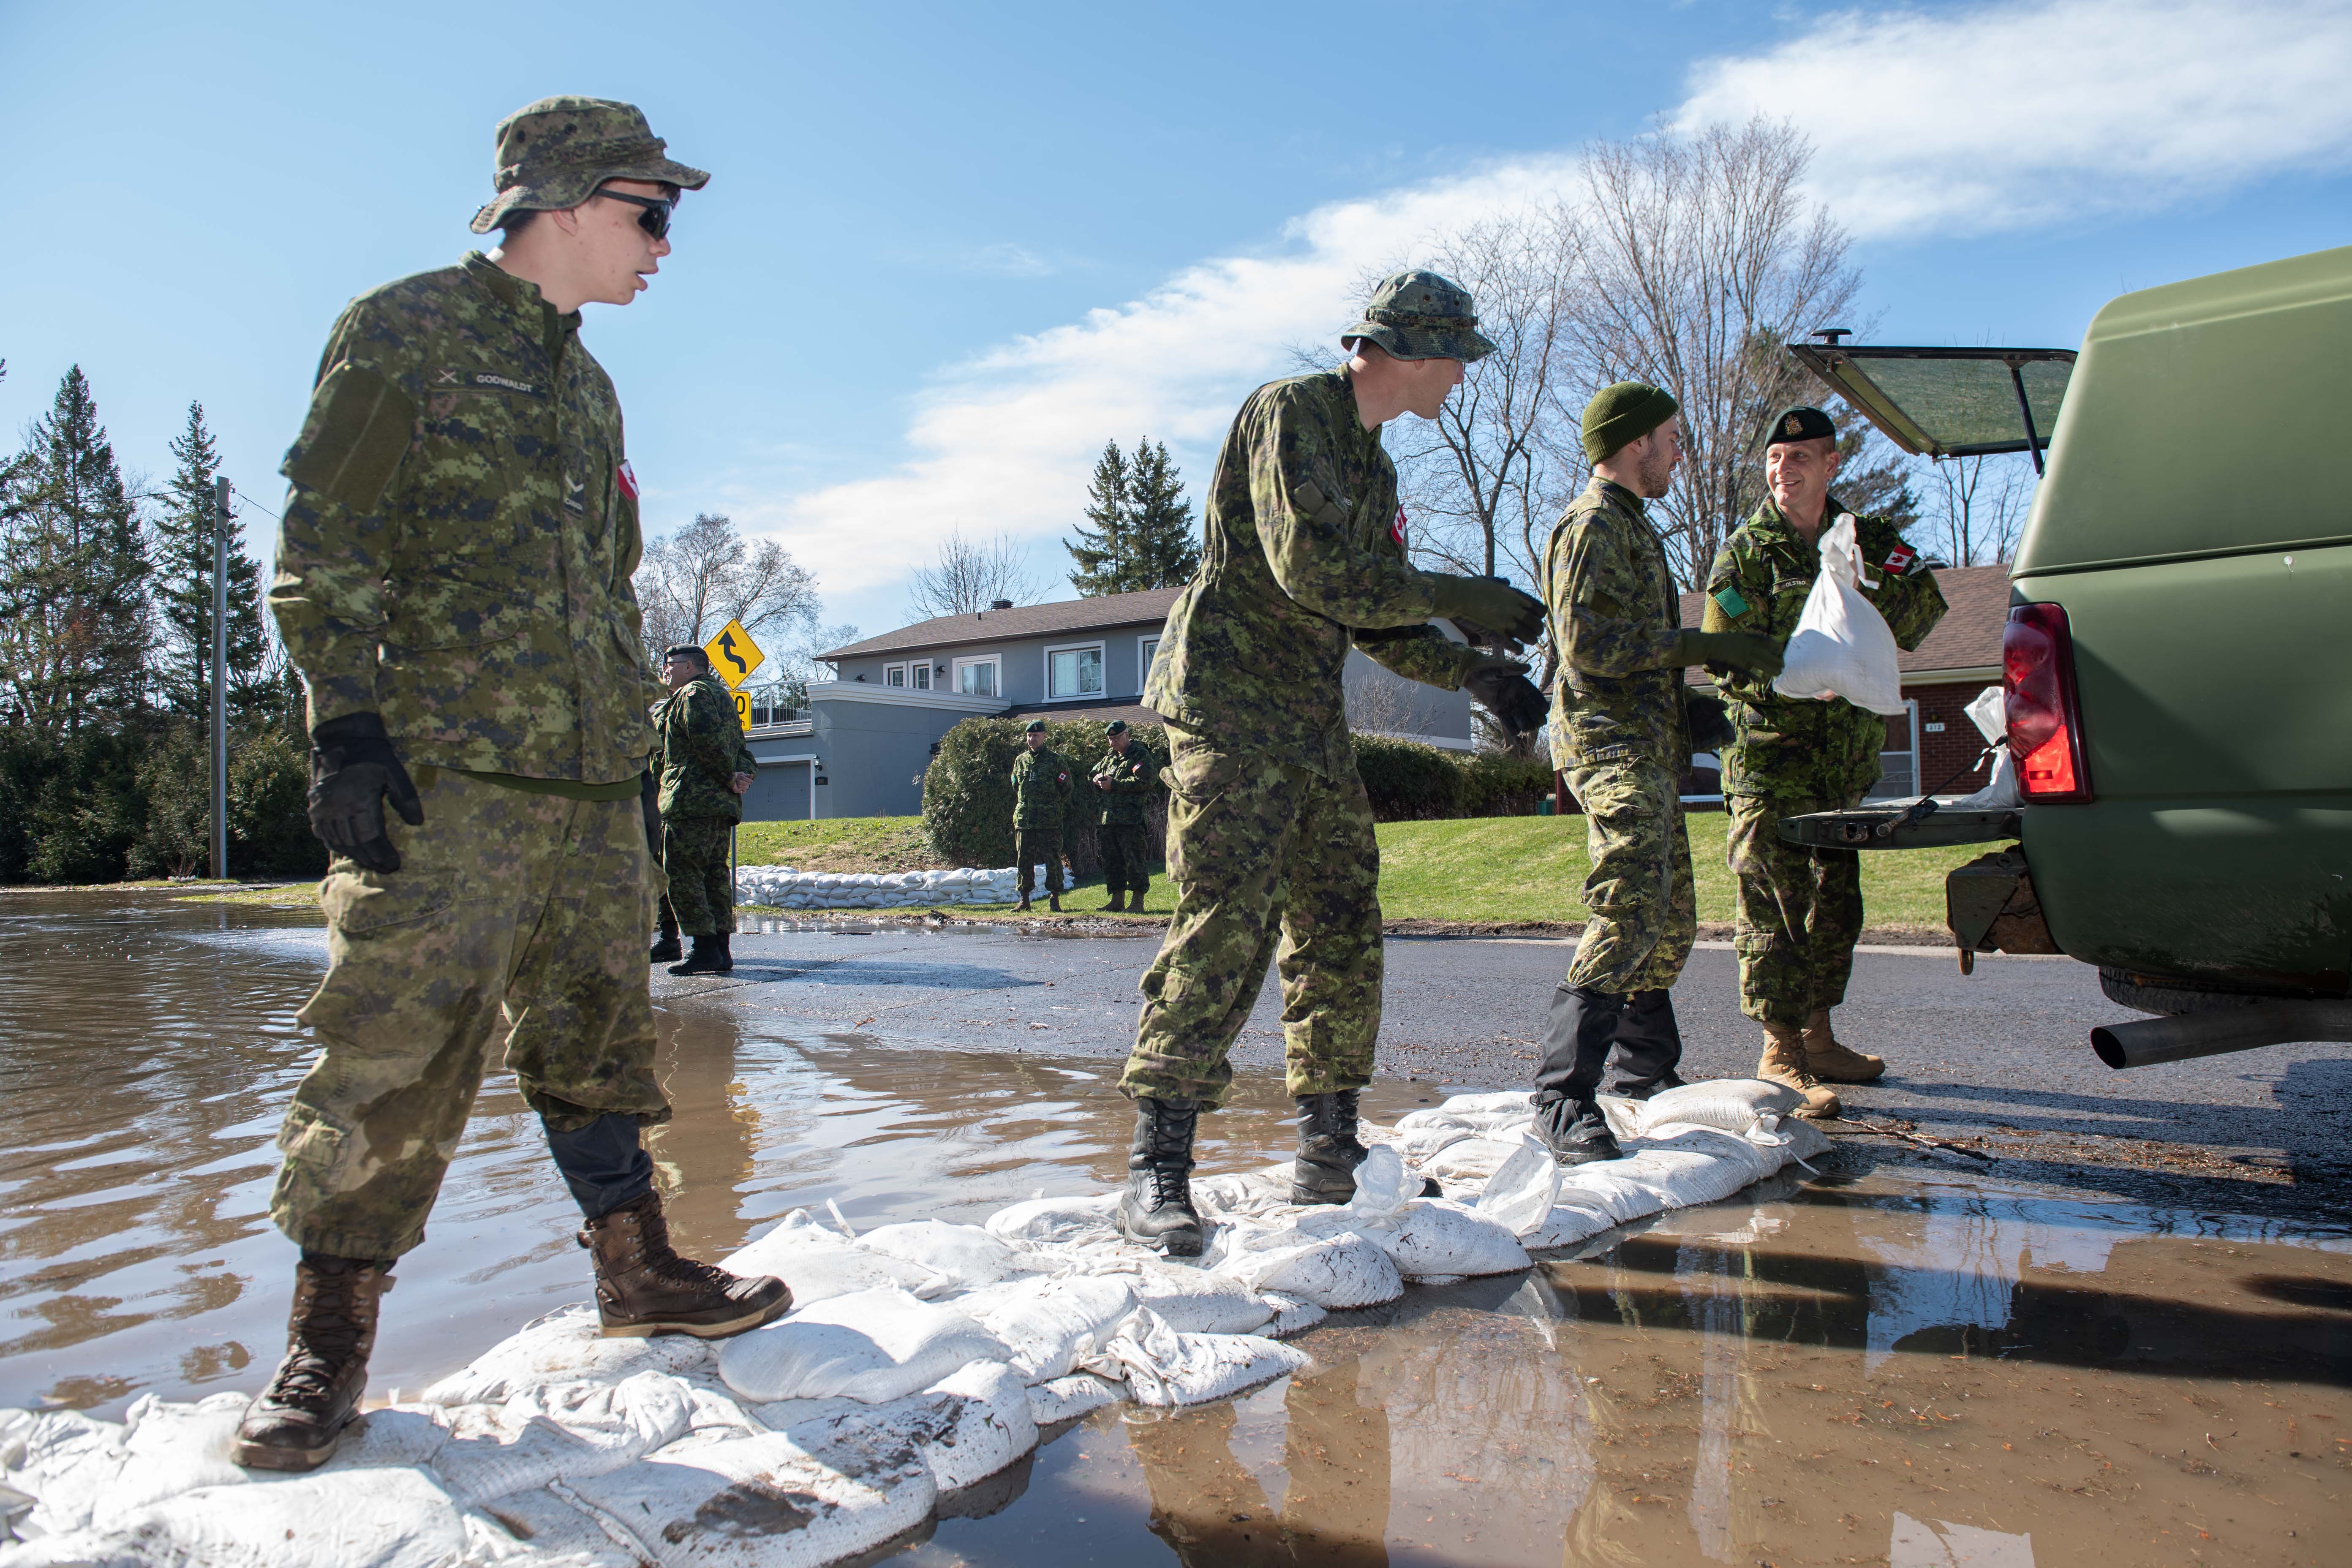 Chief Warrant Officer (CWO) Olstad, 4th Canadian Division Sergeant-Major and members of 4th Canadian Division unload sandbags used to assist Constance Bay residents in barricading water during Operation LENTUS on April 29, 2019. Photo: Master Corporal Donnie McDonald, 4 Canadian Division Headquarters Public Affairs